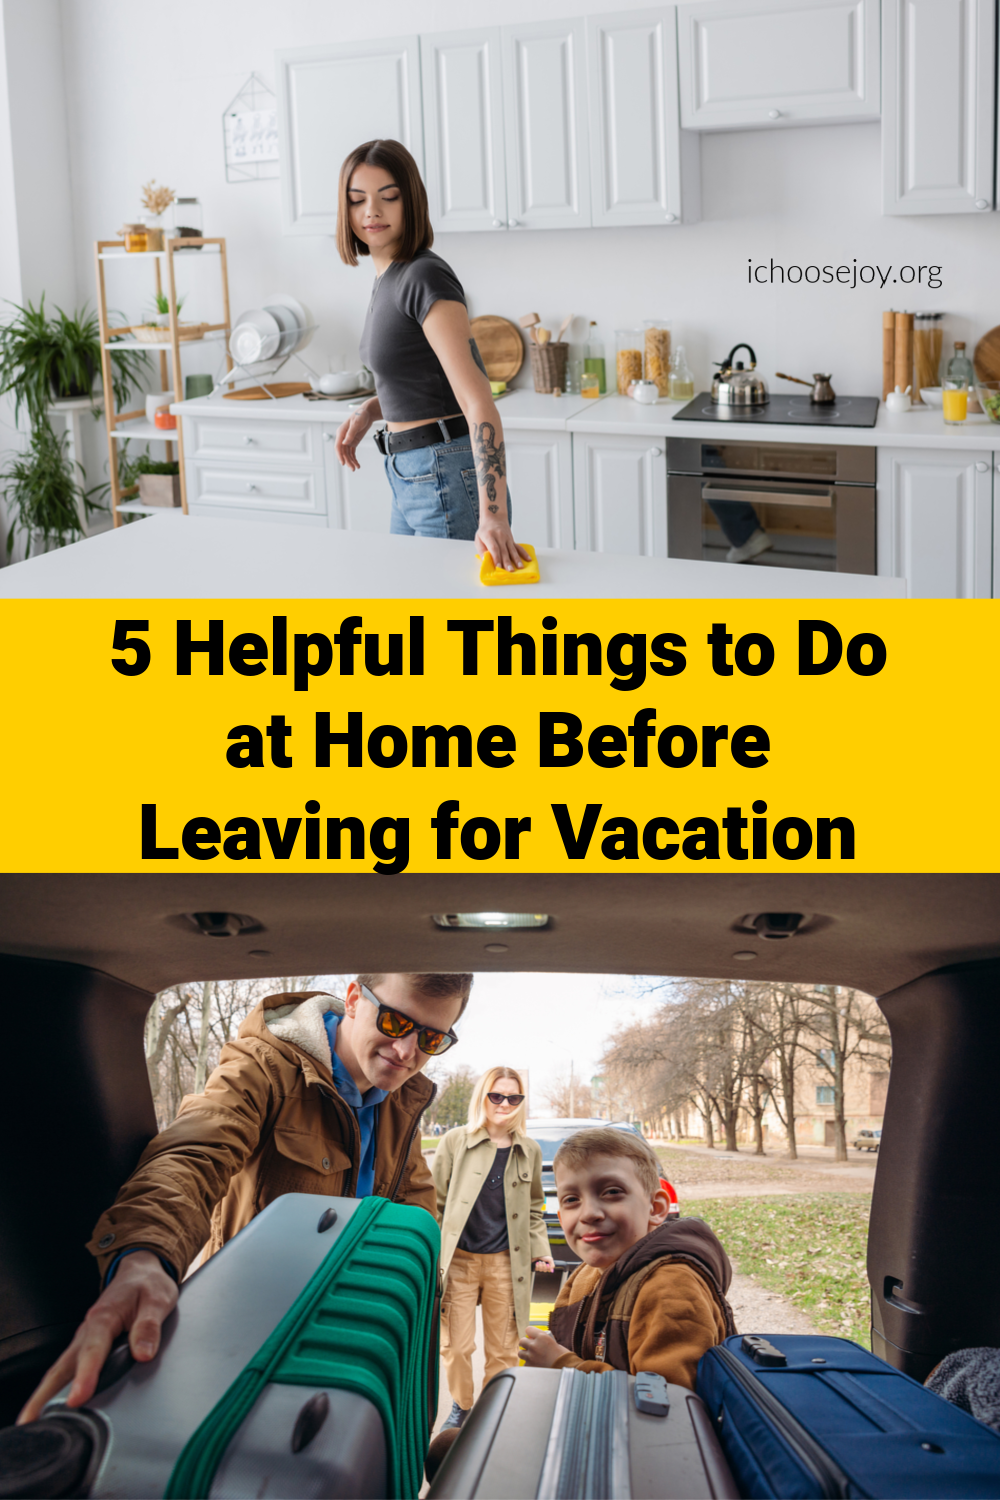 5 Helpful Things to Do at Home Before Leaving for Vacation